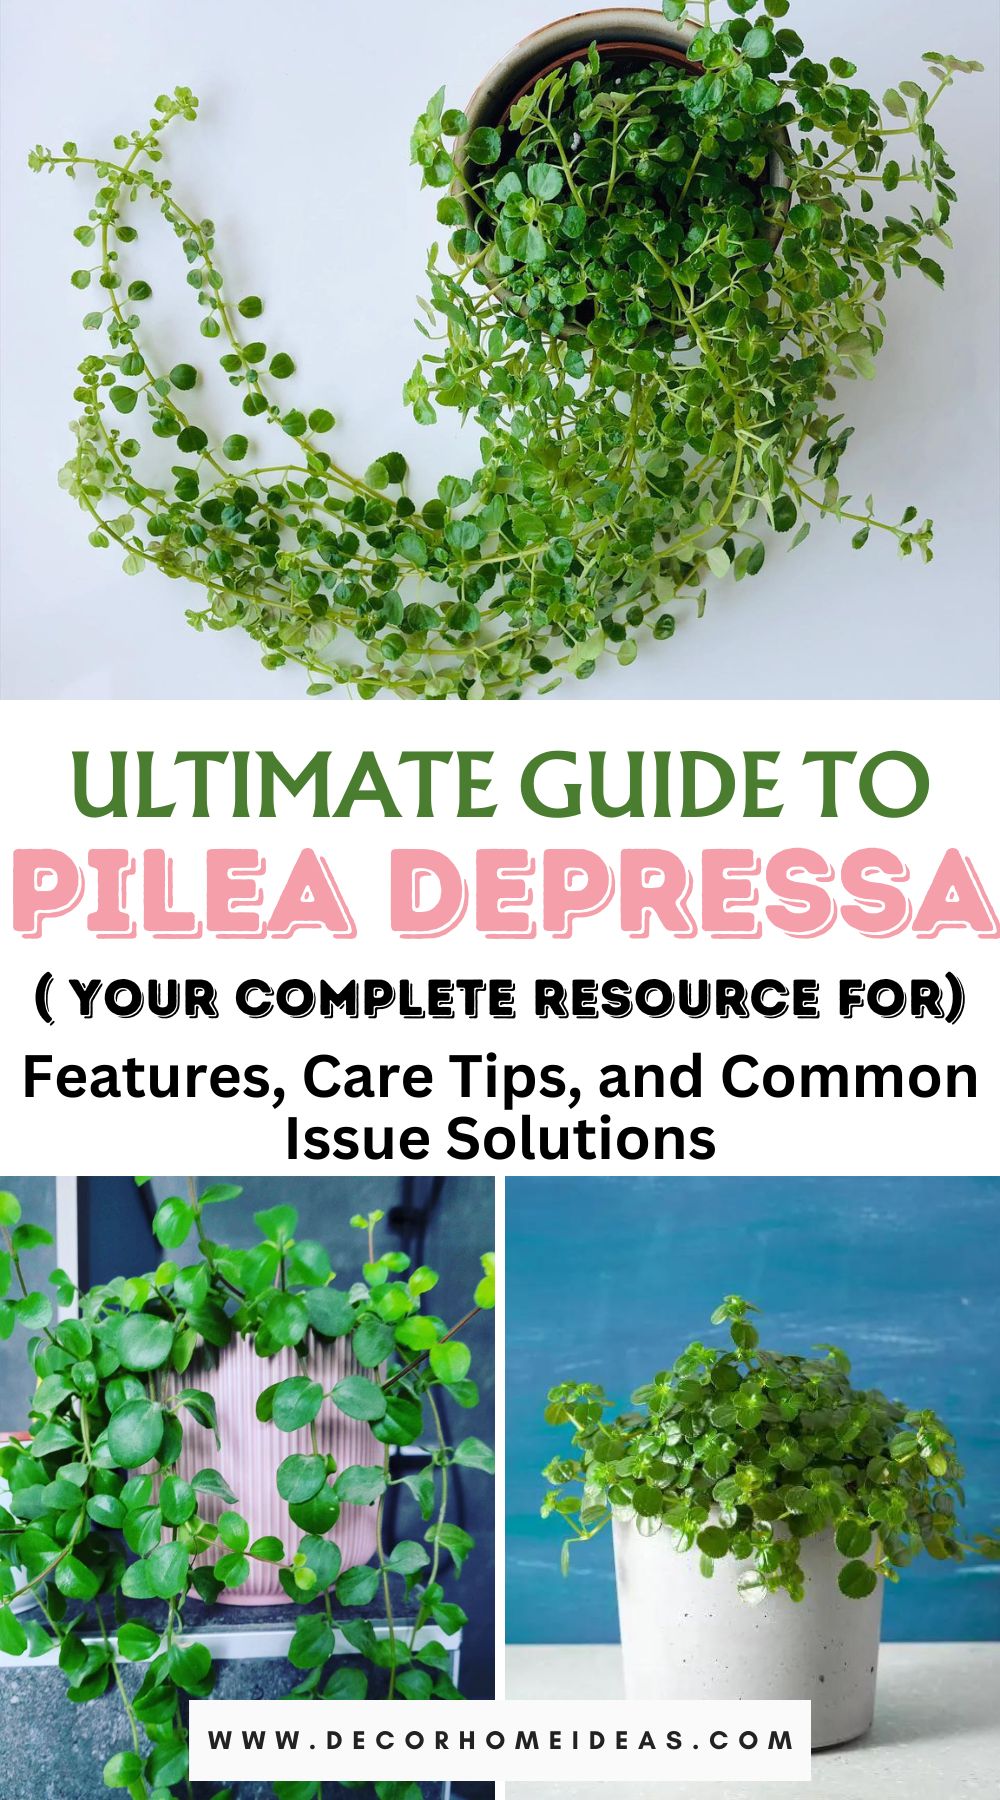 Master the art of nurturing Pilea Depressa with our comprehensive care guide. Explore its unique features and effective solutions to common issues, ensuring your Pilea thrives in style.